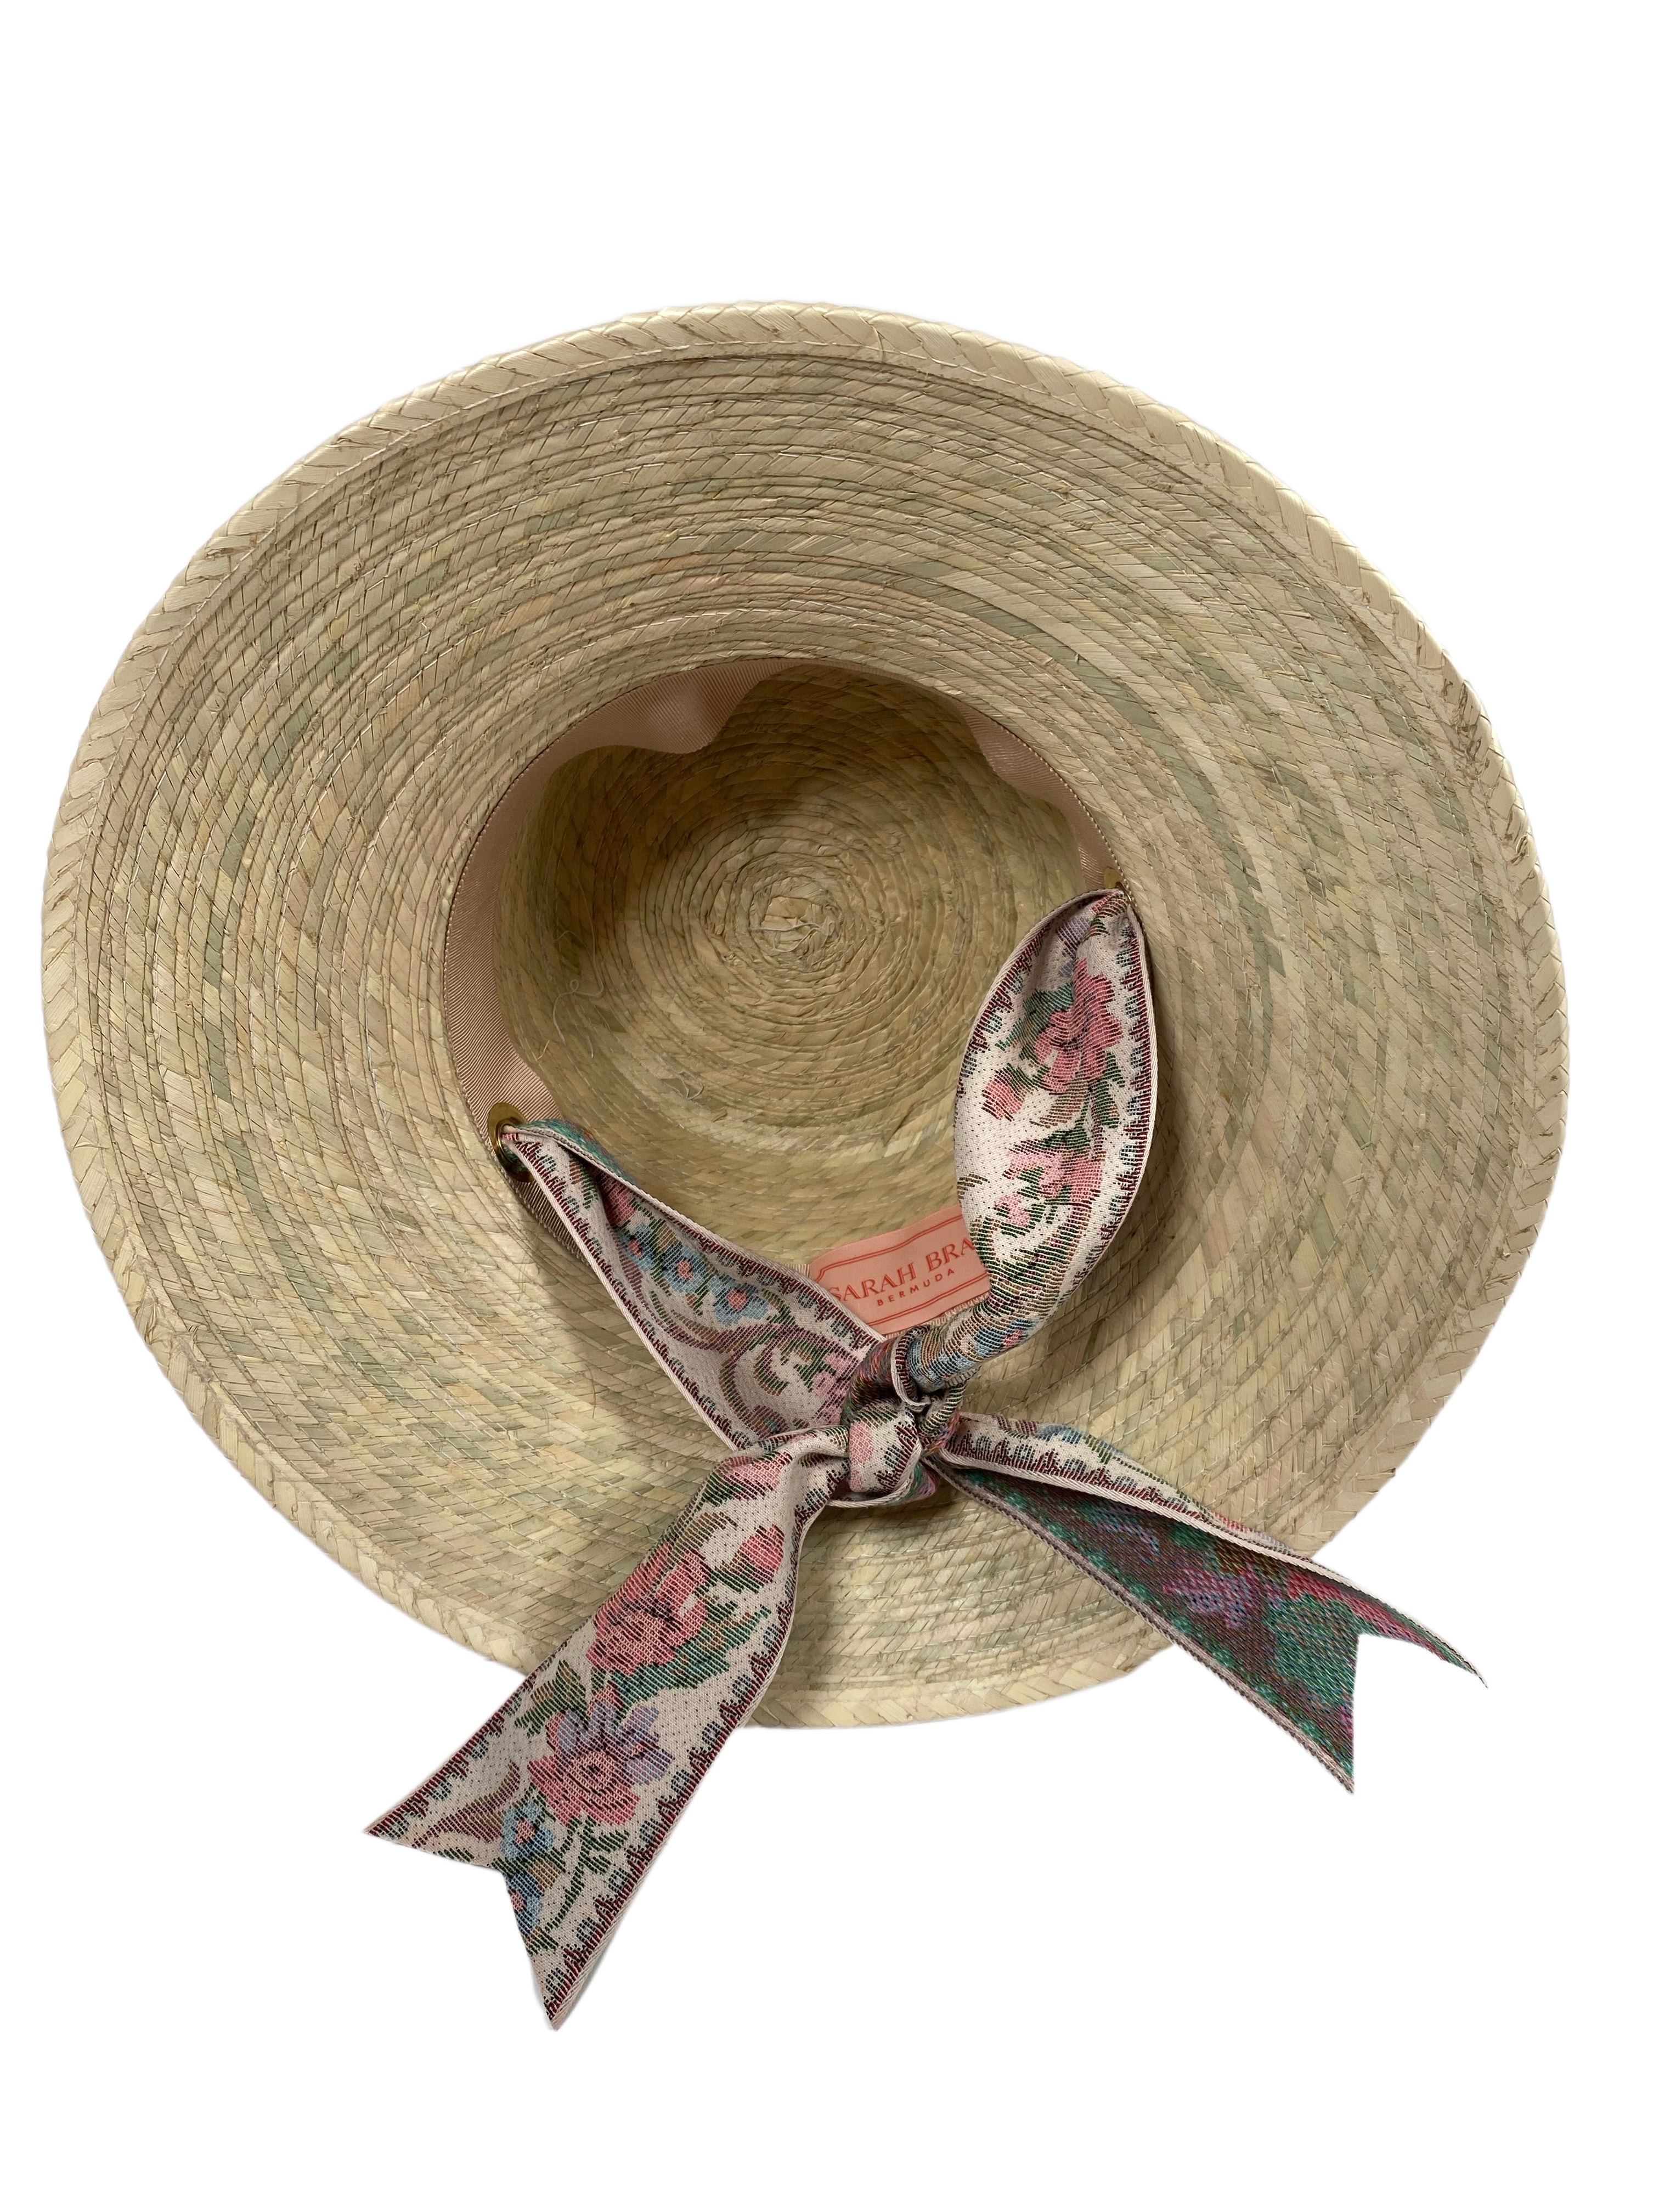 Clematis Bucket Hat - Antique Tapestry Floral Ribbon – Sarah Bray